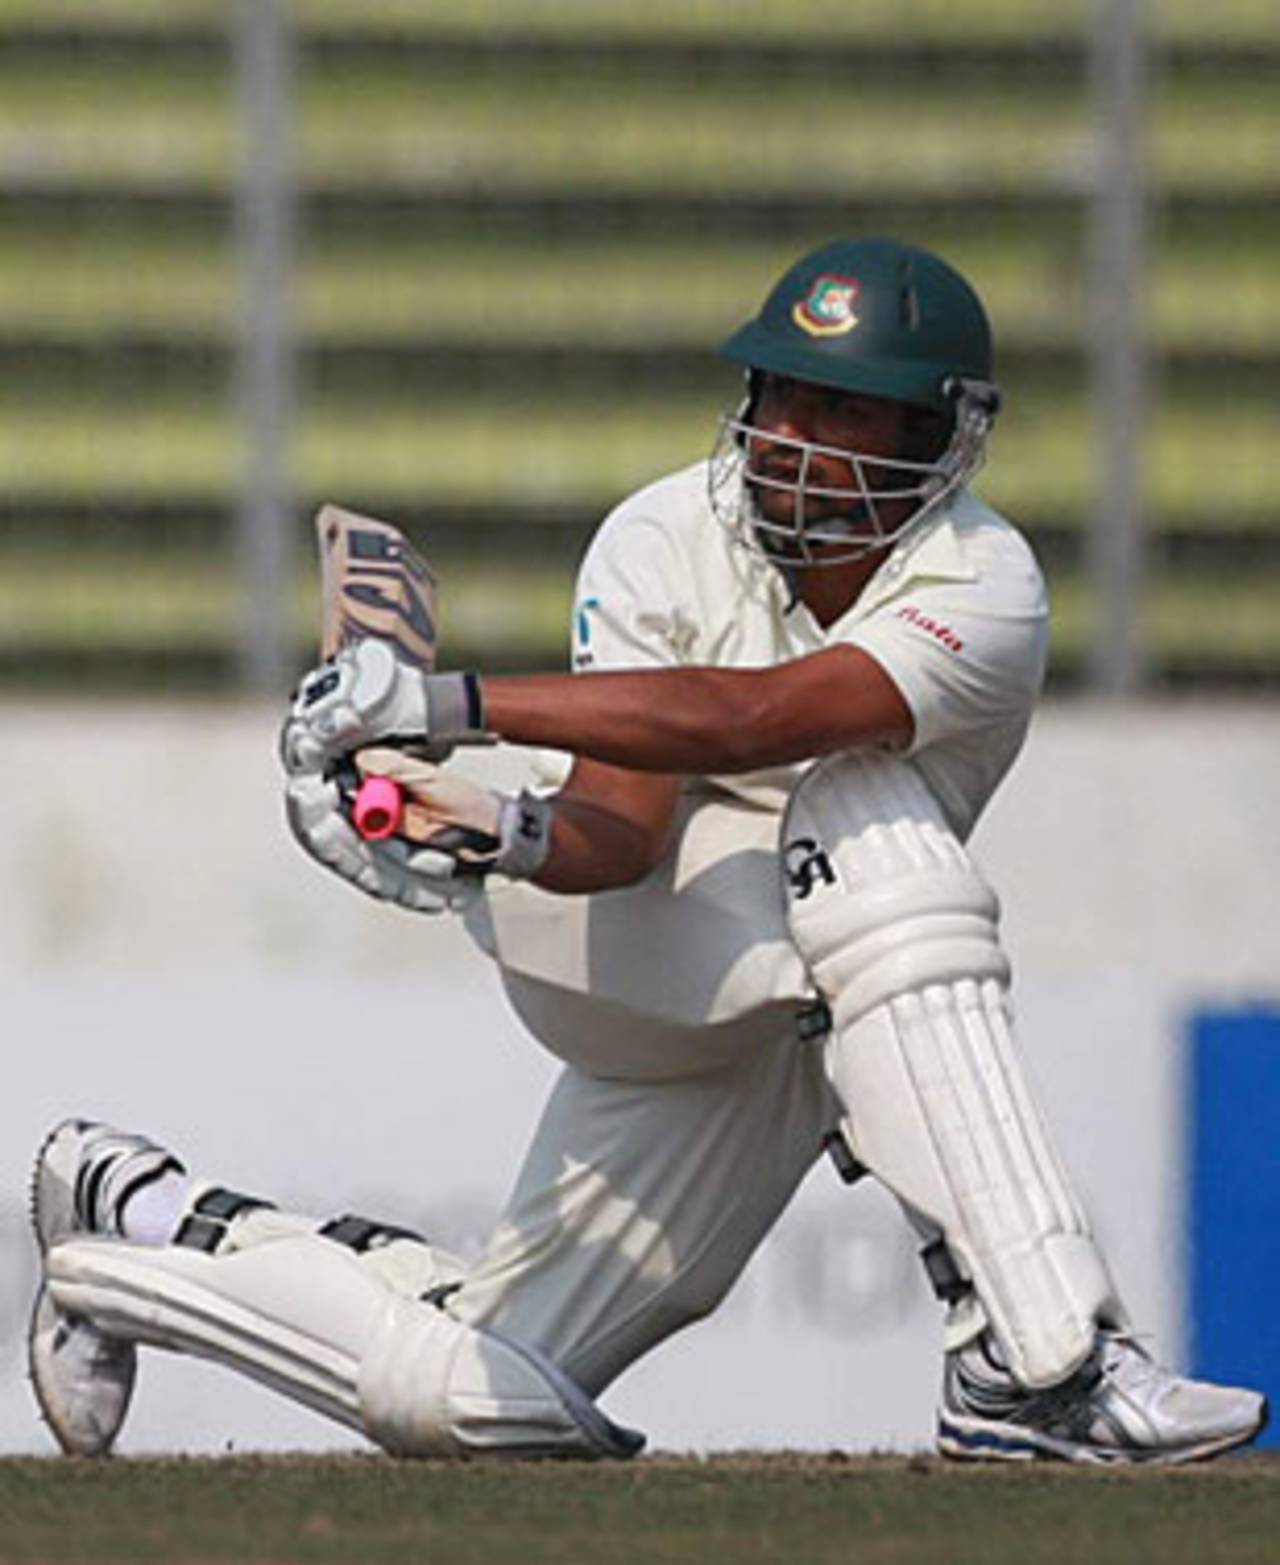 Tamim Iqbal's increasing proficiency at playing the sweep shot is one among many examples that show his willingness to improve&nbsp;&nbsp;&bull;&nbsp;&nbsp;Associated Press